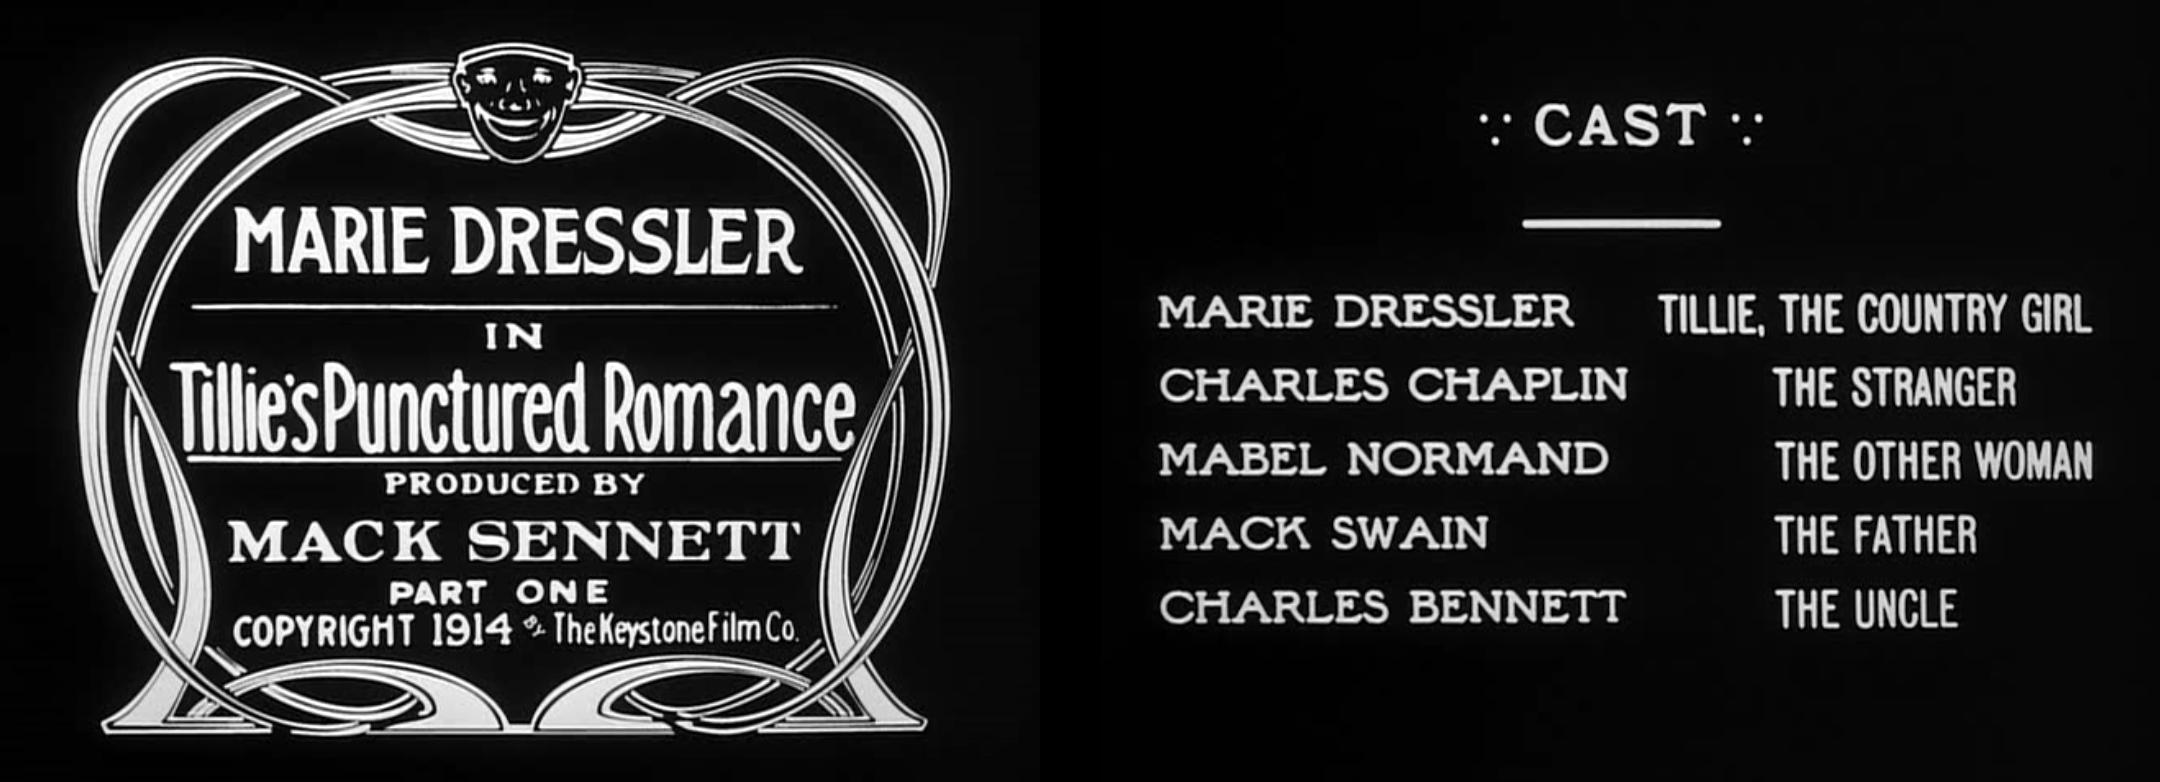 The two opening title cards of the 1914 film "Tillie's Punctured Romance". The lead actress, Marie Dressler, and the producer Mack Sennett are mentioned on the first card. The second card lists some of the cast members and their roles, including Marie, Charles Chaplin, Mabel Normand, Mack Swain, and Charles Bennett